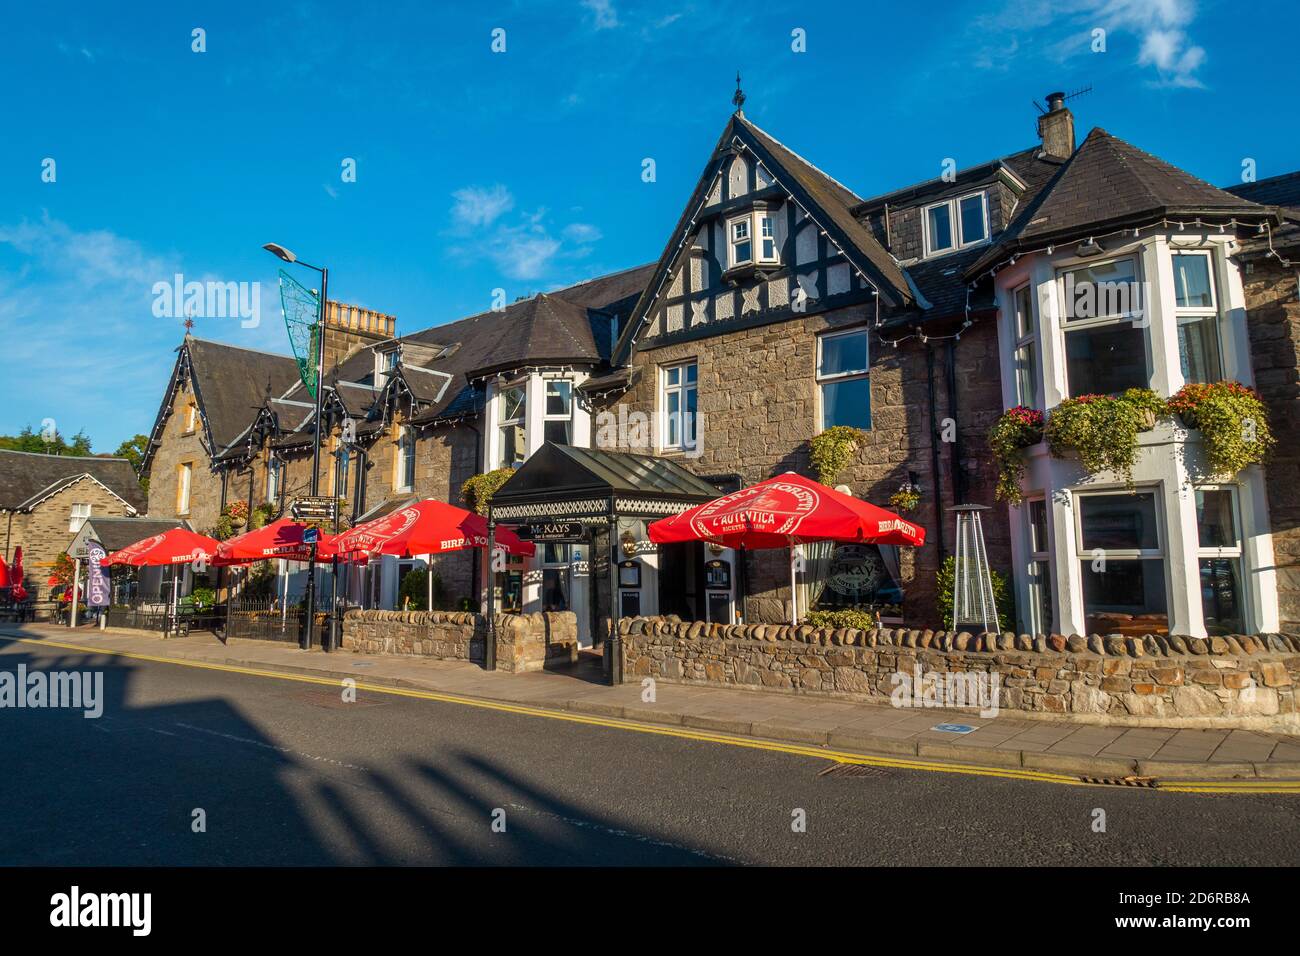 McKay's Hotel, bar and restaurant plus Fish and Chips takeaway in the town of Pitlochry, Perthshire, Scotland, UK Stock Photo